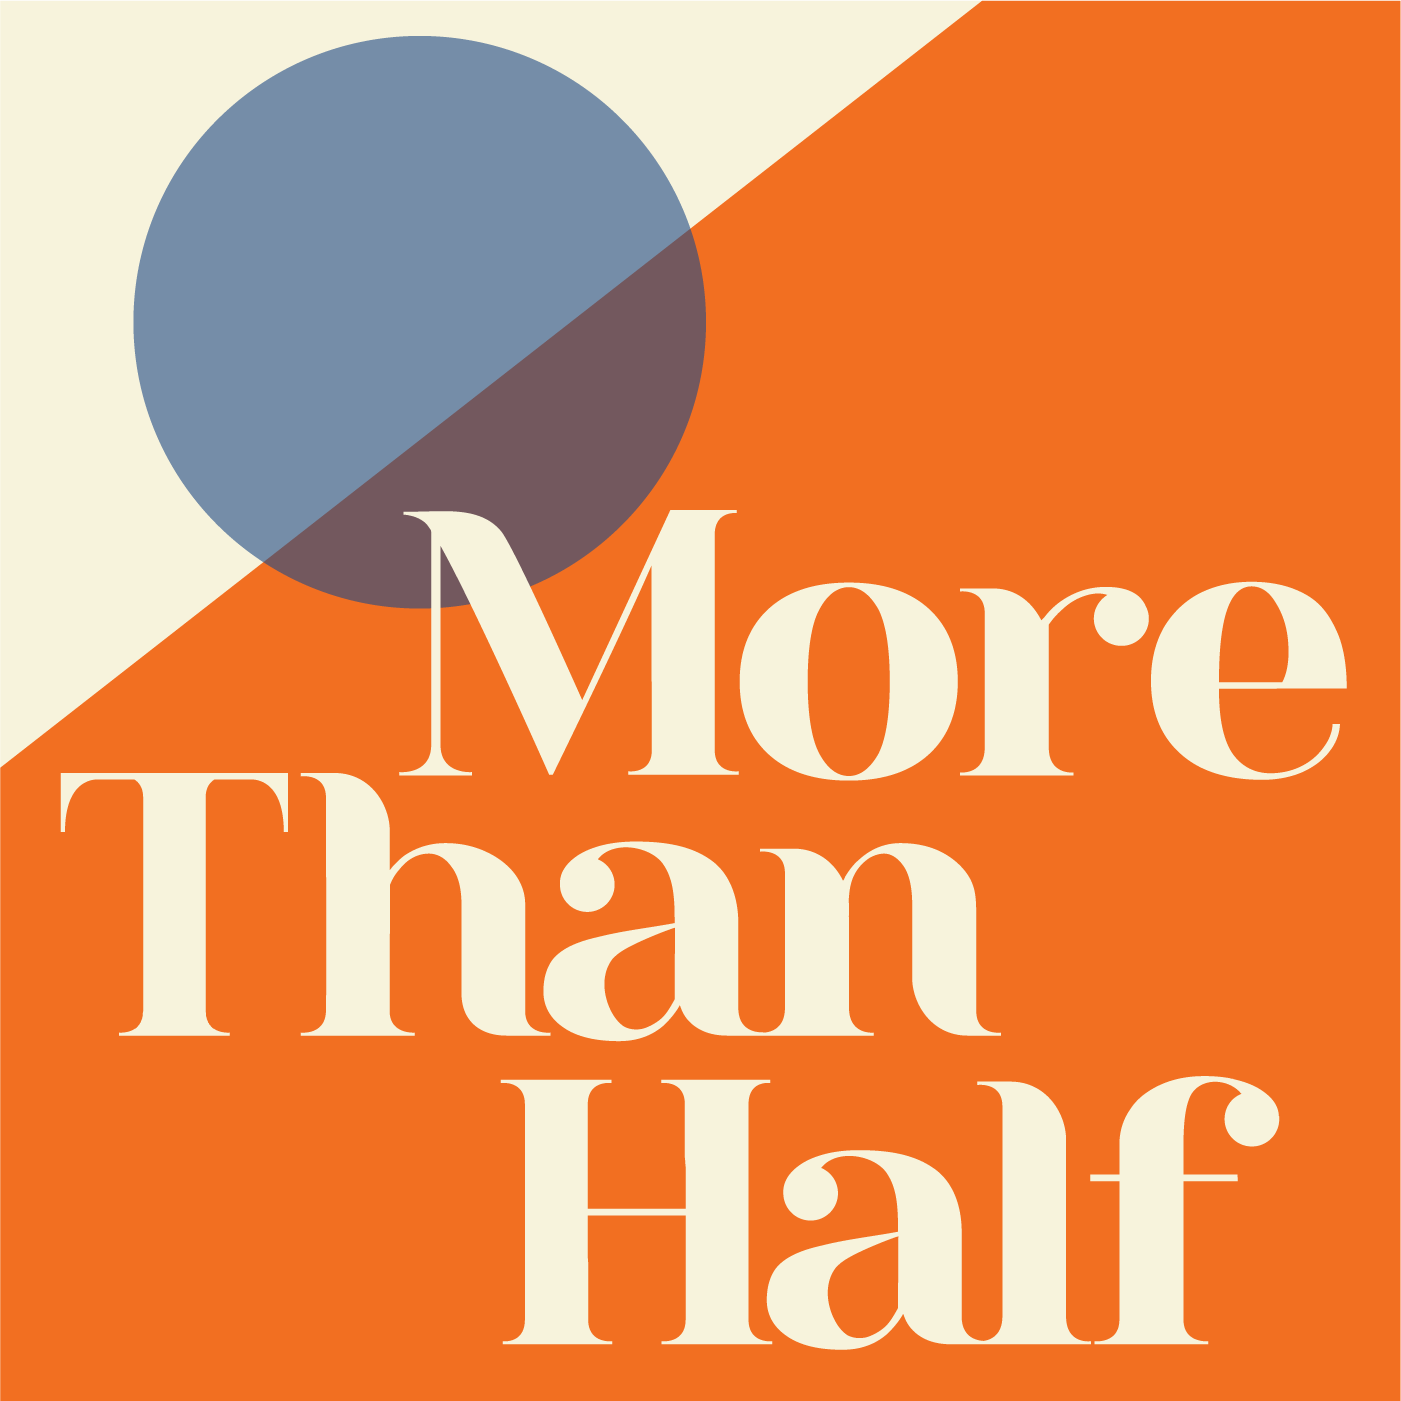 Listen to the More Than Half podcast from PBS Utah